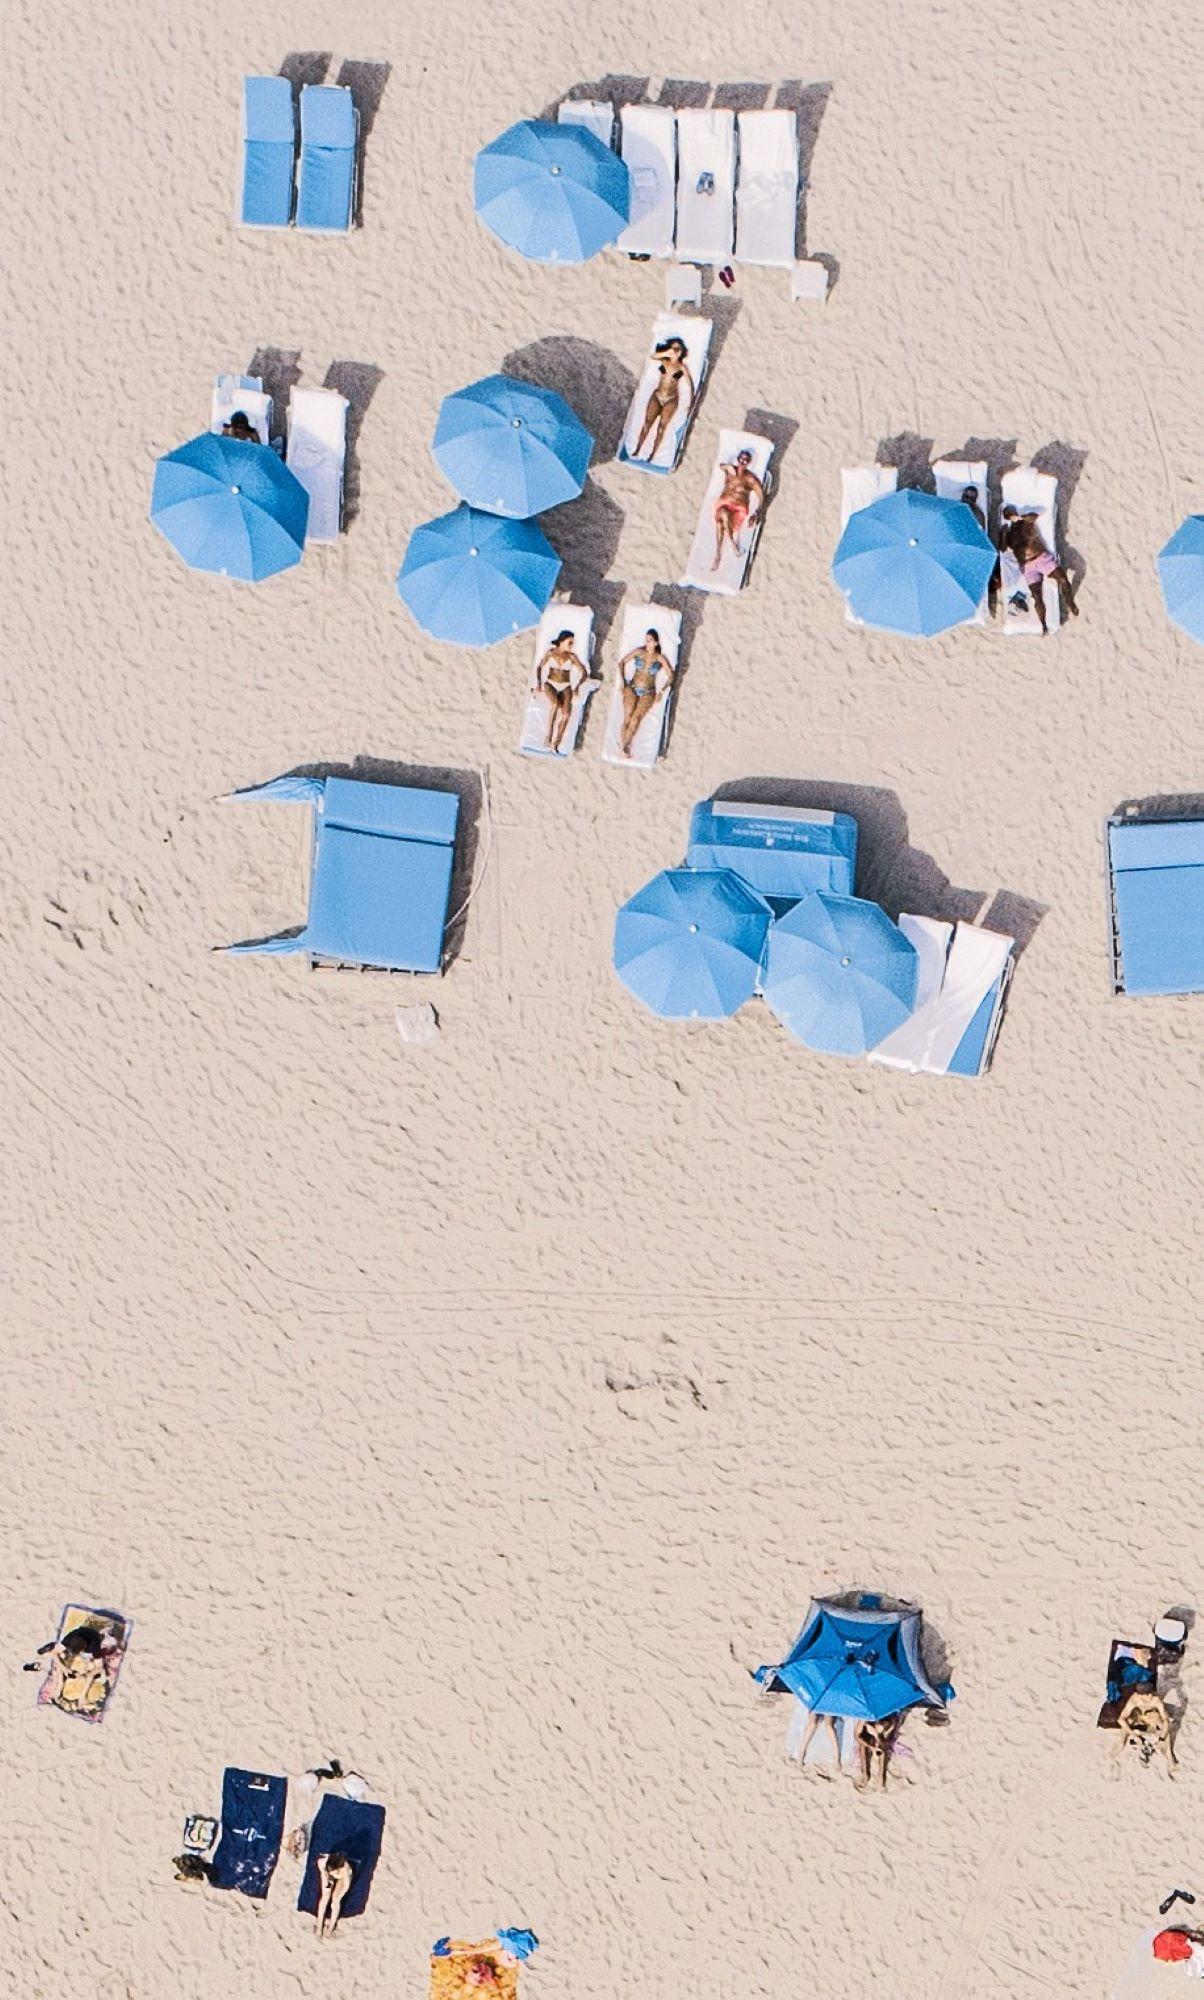 Miami II 005 by Bernhard Lang - Aerial view photography, beach, sea, umbrellas For Sale 1